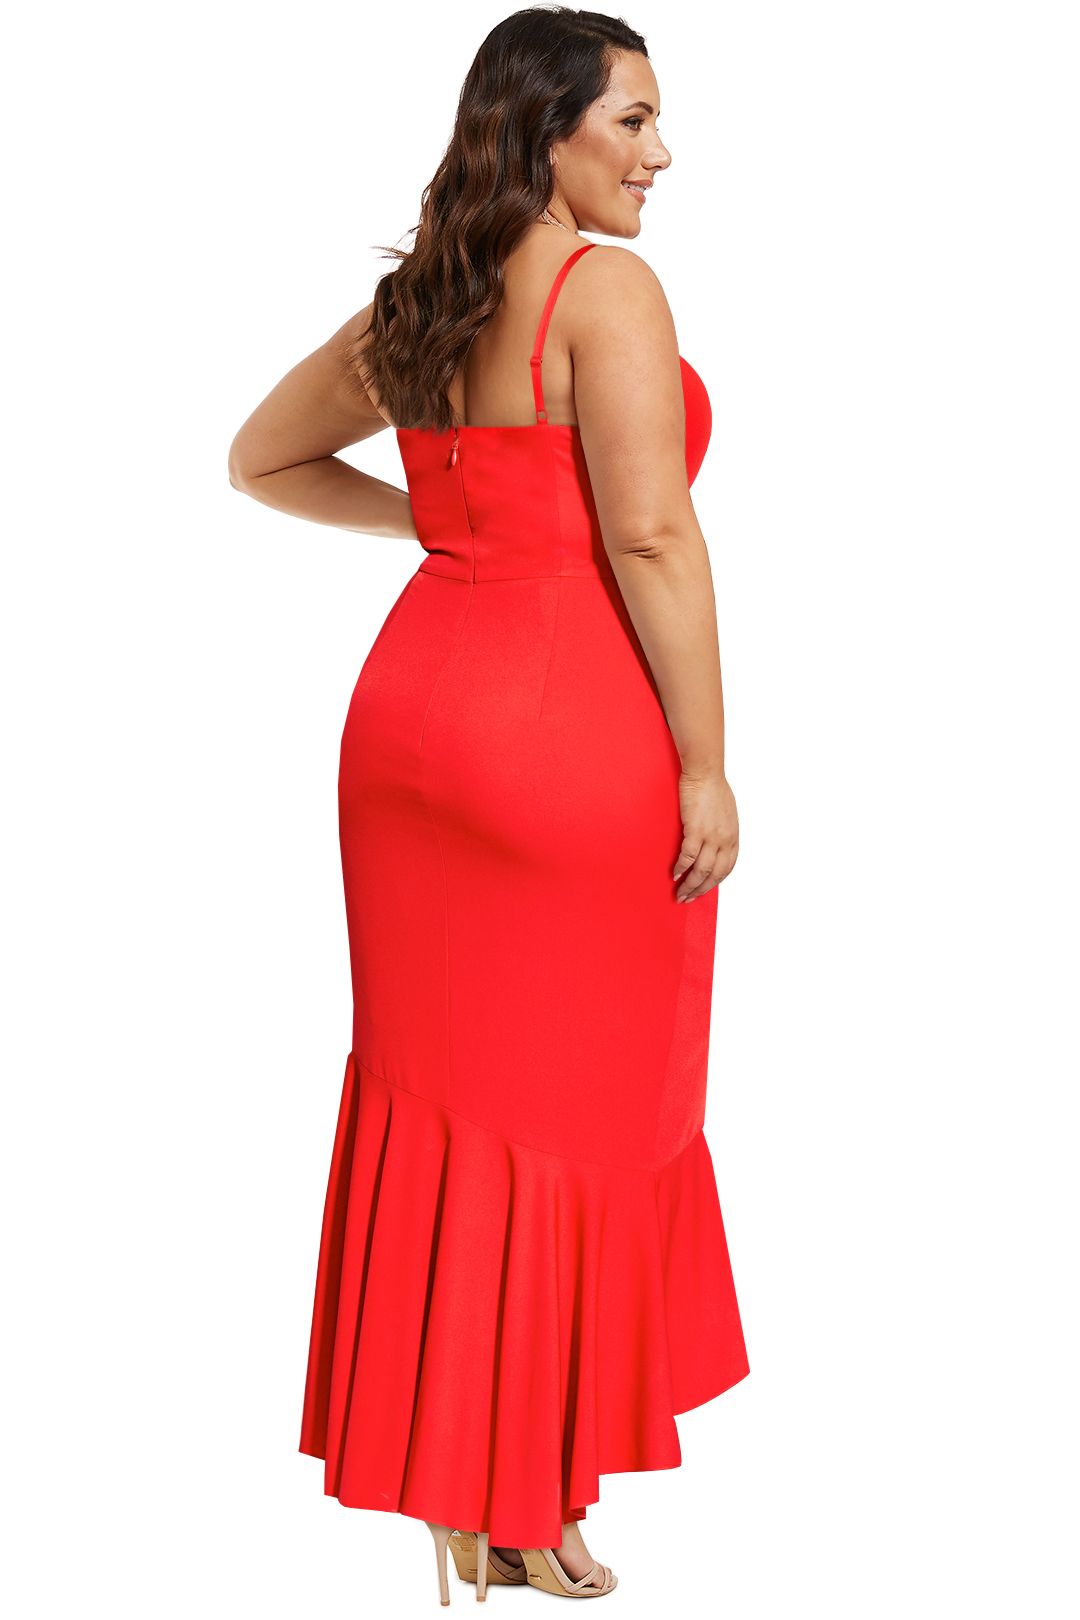 City-Chic-Ruffle-Delight-Maxi-Dress-Red-Back